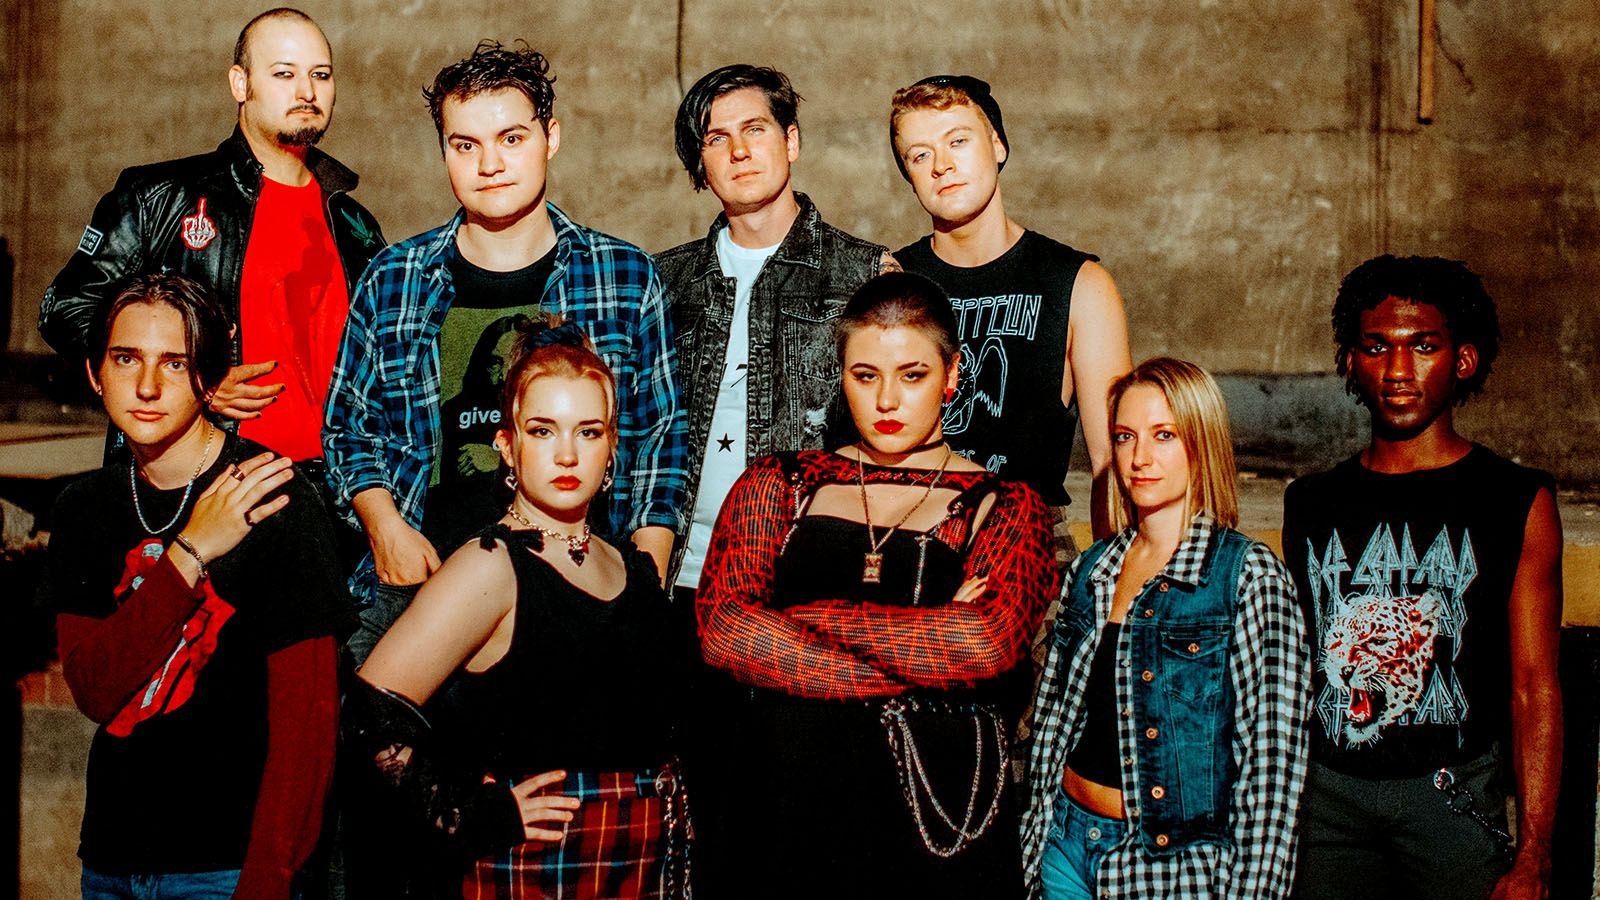 "American Idiot" opens at Arena Dinner Theatre on Sept. 22.